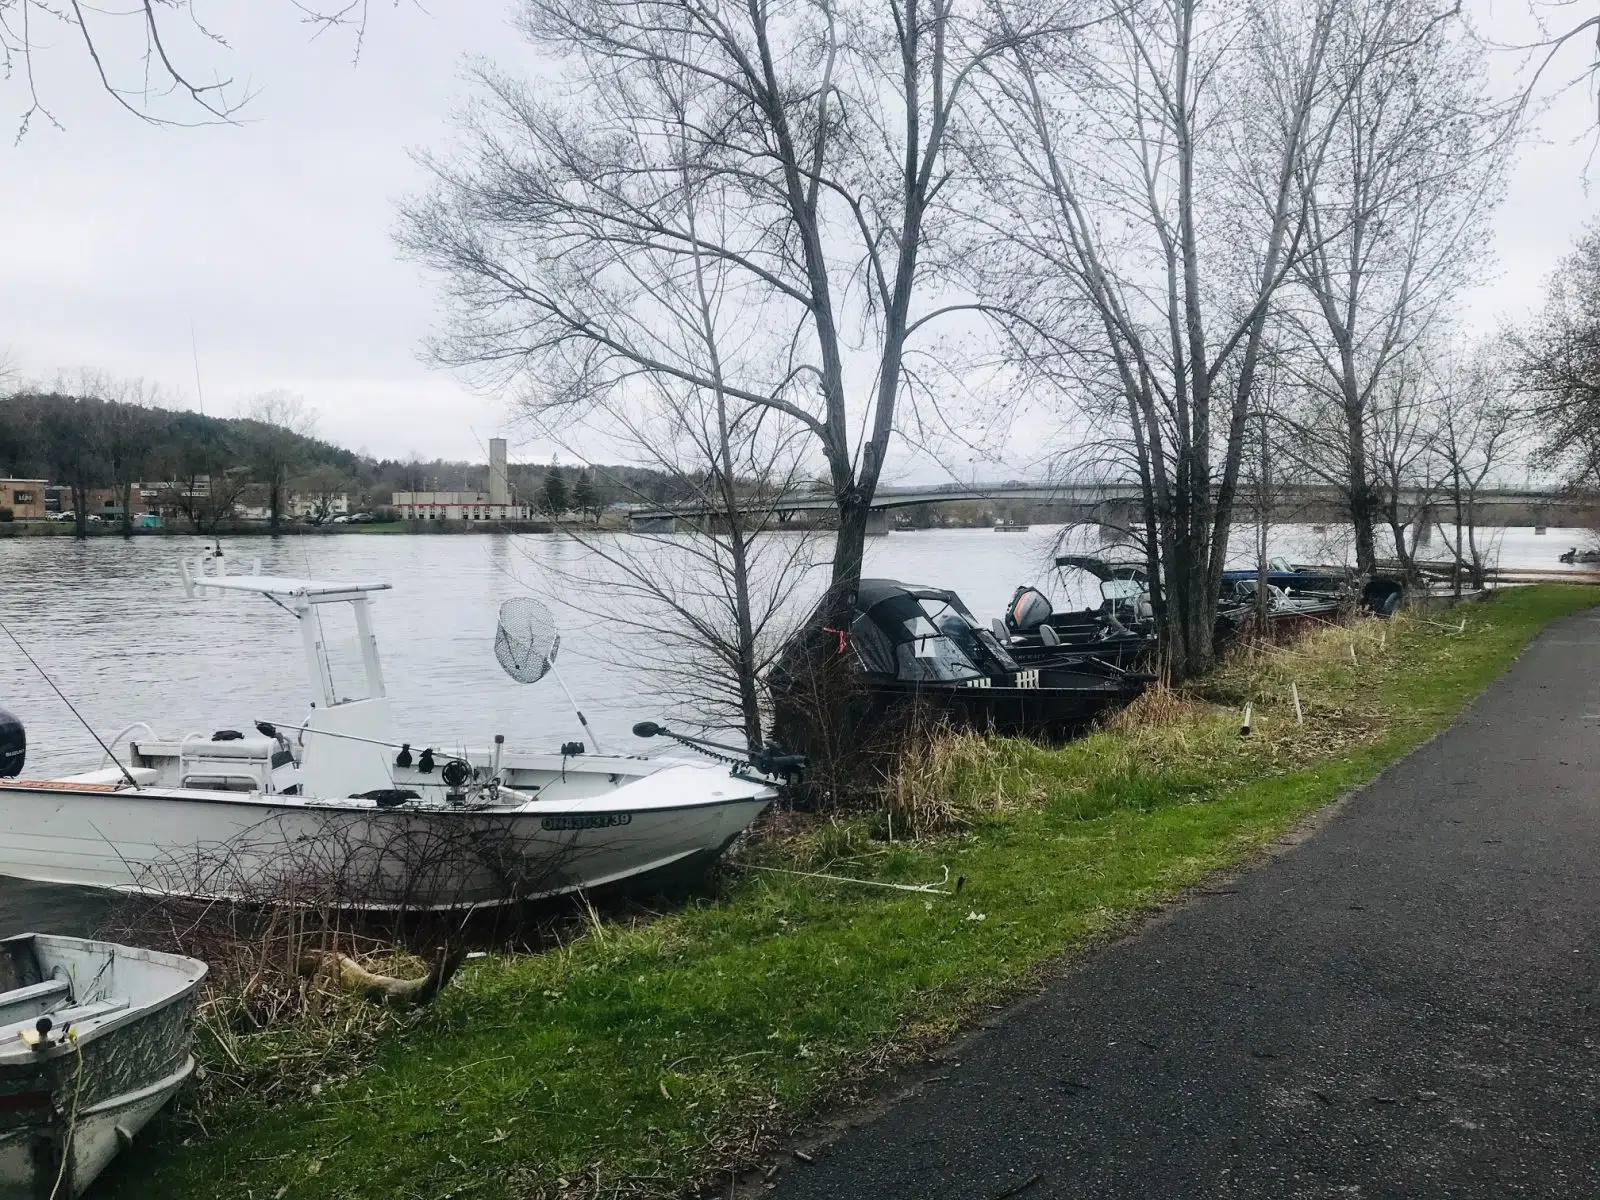 Better boat launch in works